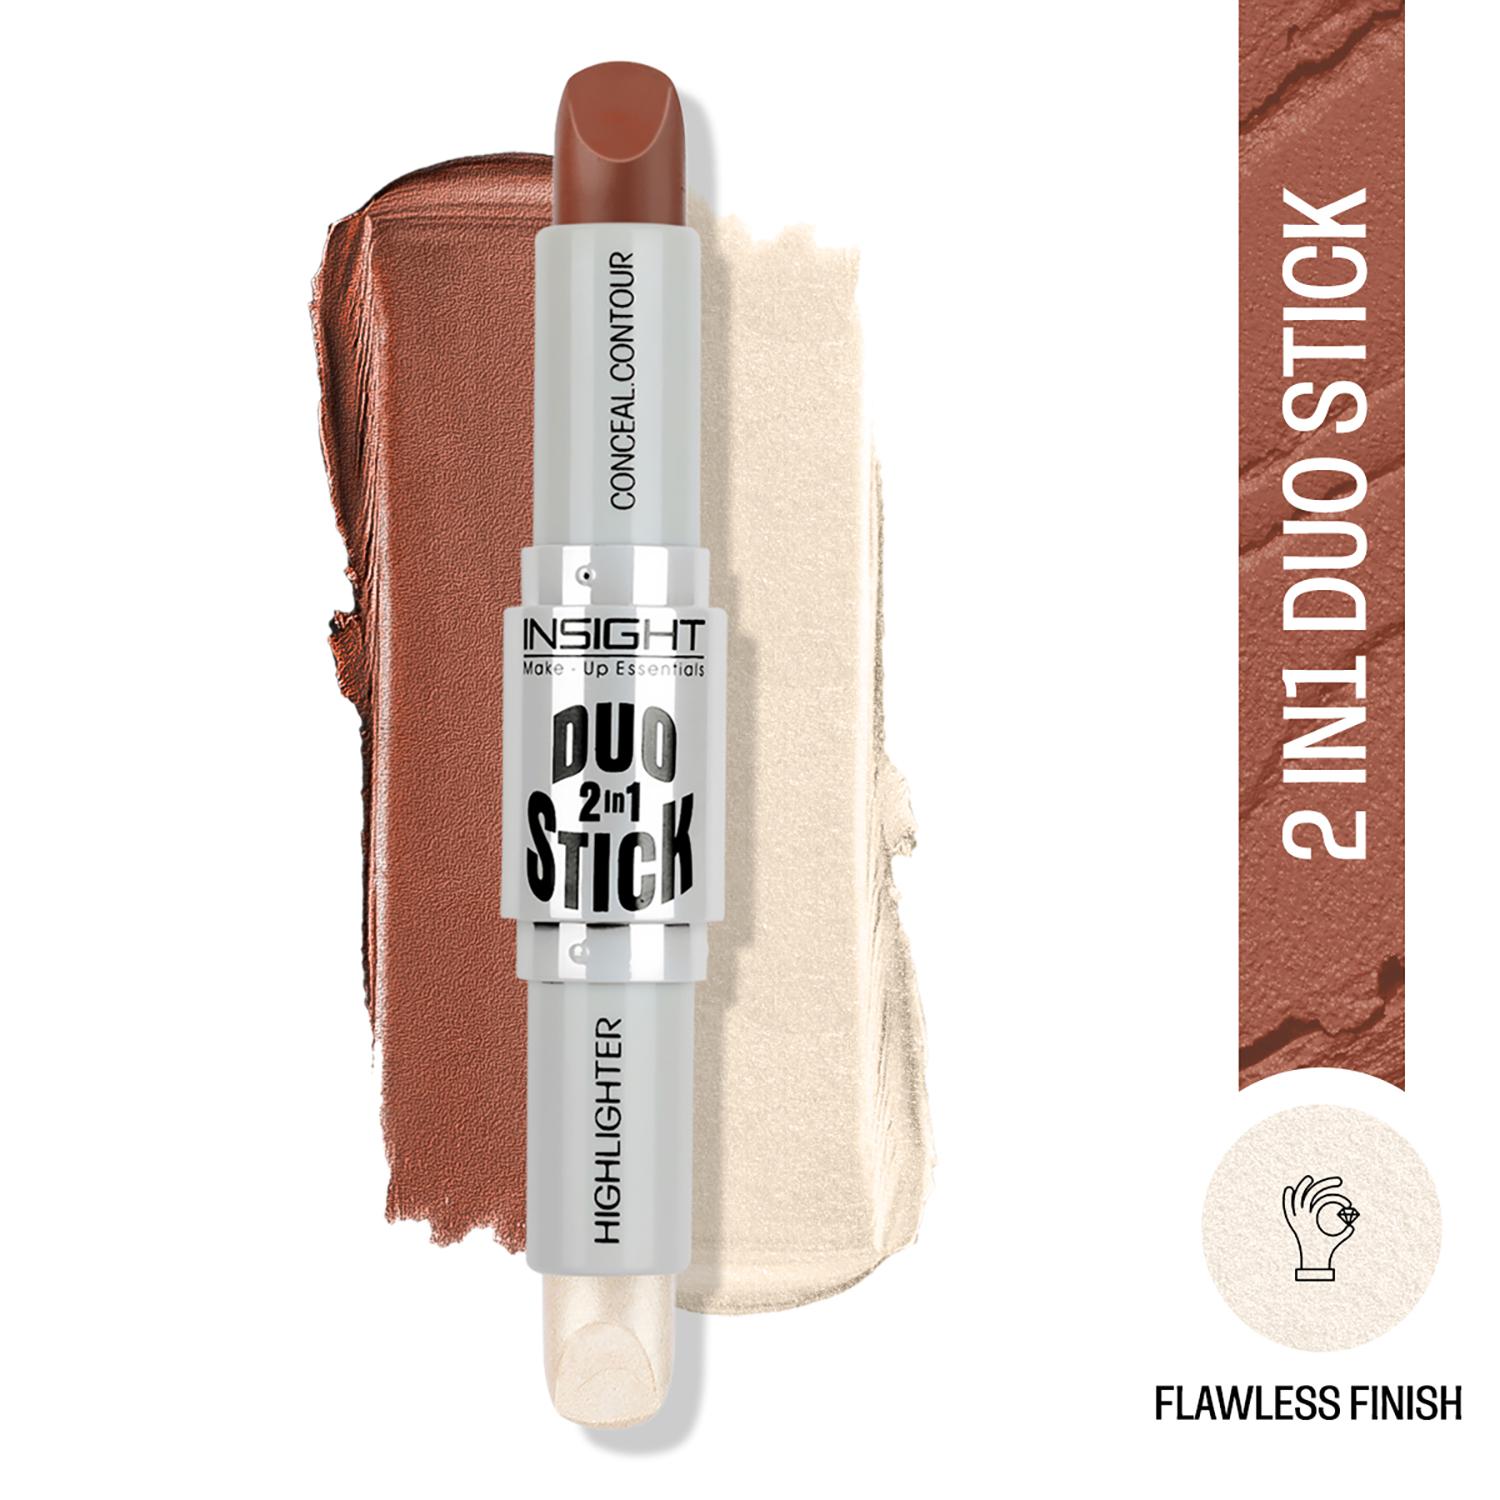 Insight Cosmetics | Insight Cosmetics Duo Stick Conceal Contour + Highlighter - 03 Chocolate (8.5g)